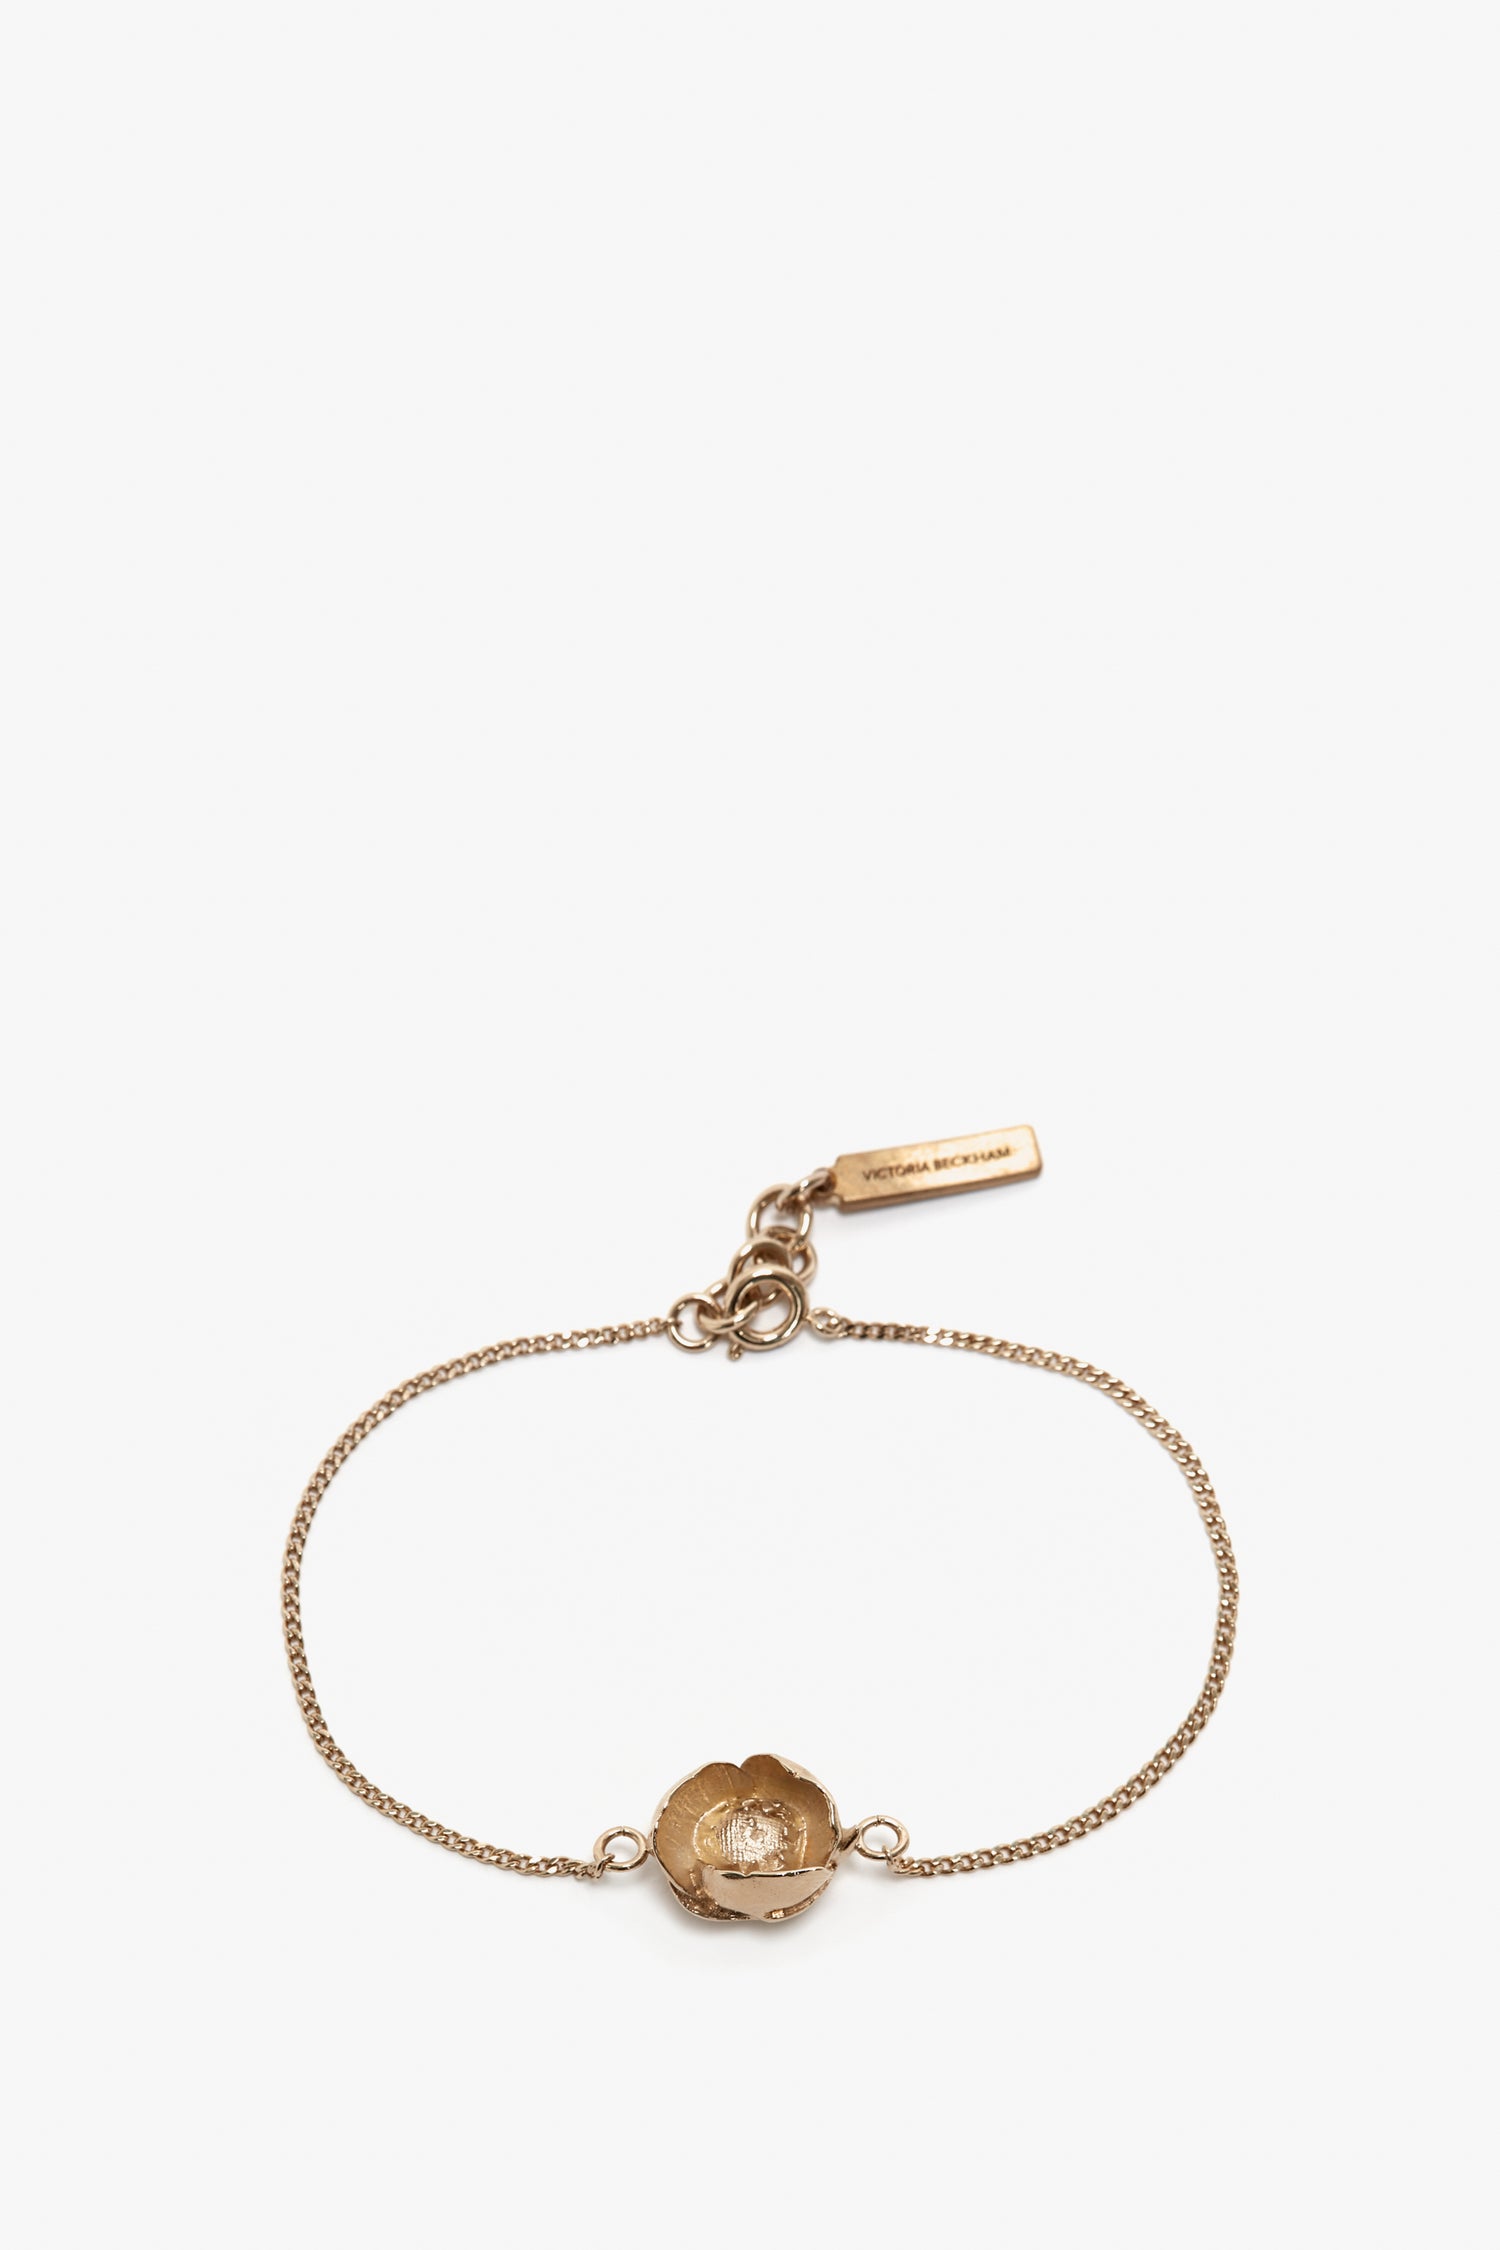 Exclusive Camellia Flower Bracelet In Gold by Victoria Beckham featuring a gold chain with an adjustable clasp and a flower-shaped charm at the center.